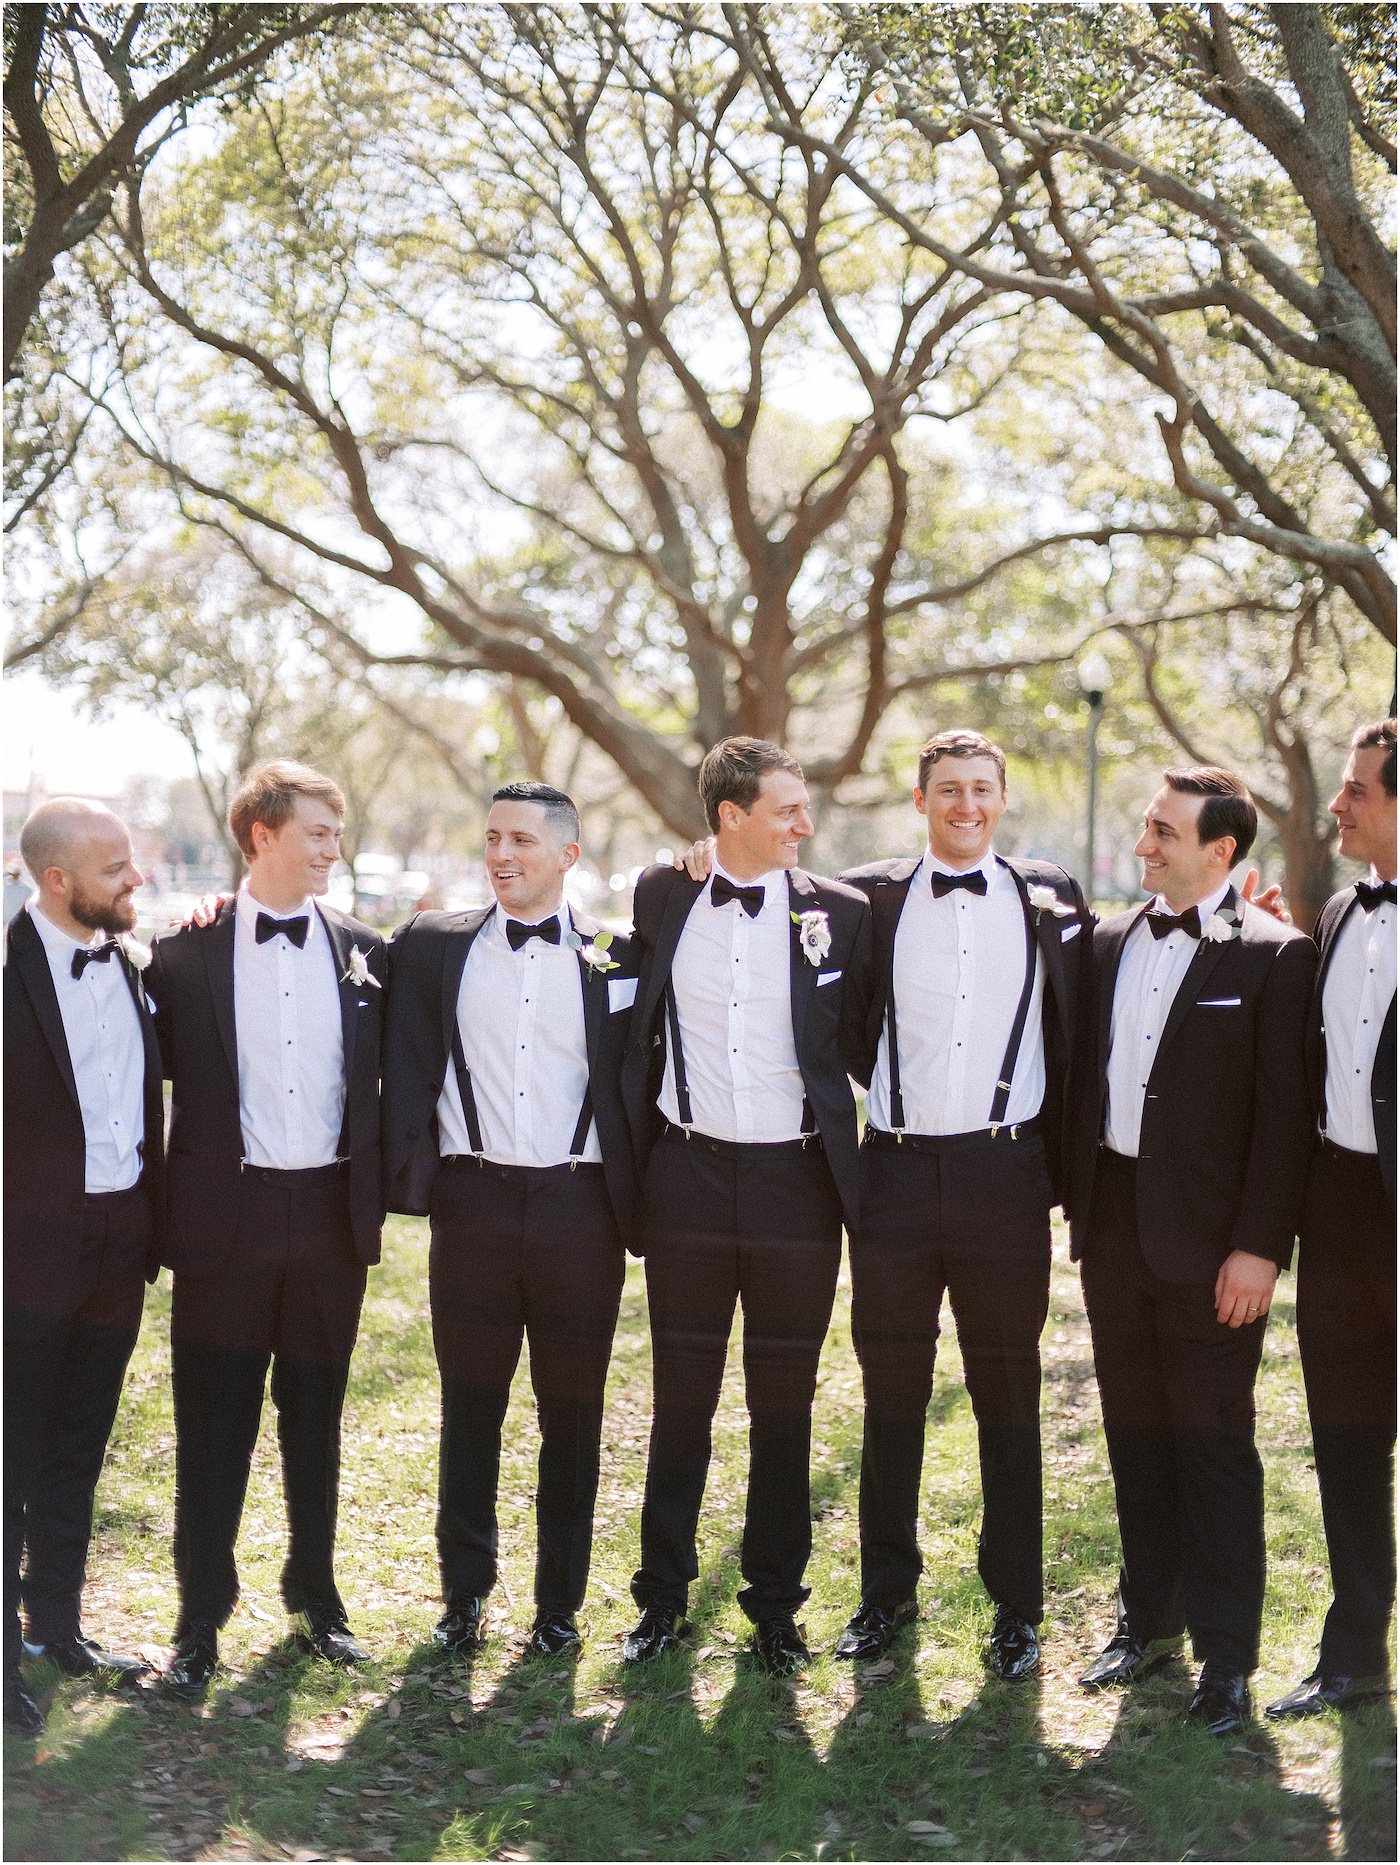 Groom and Groomsmen Portraits wearing Classic Black Suit Tuxedo and Bow Ties with Suspenders